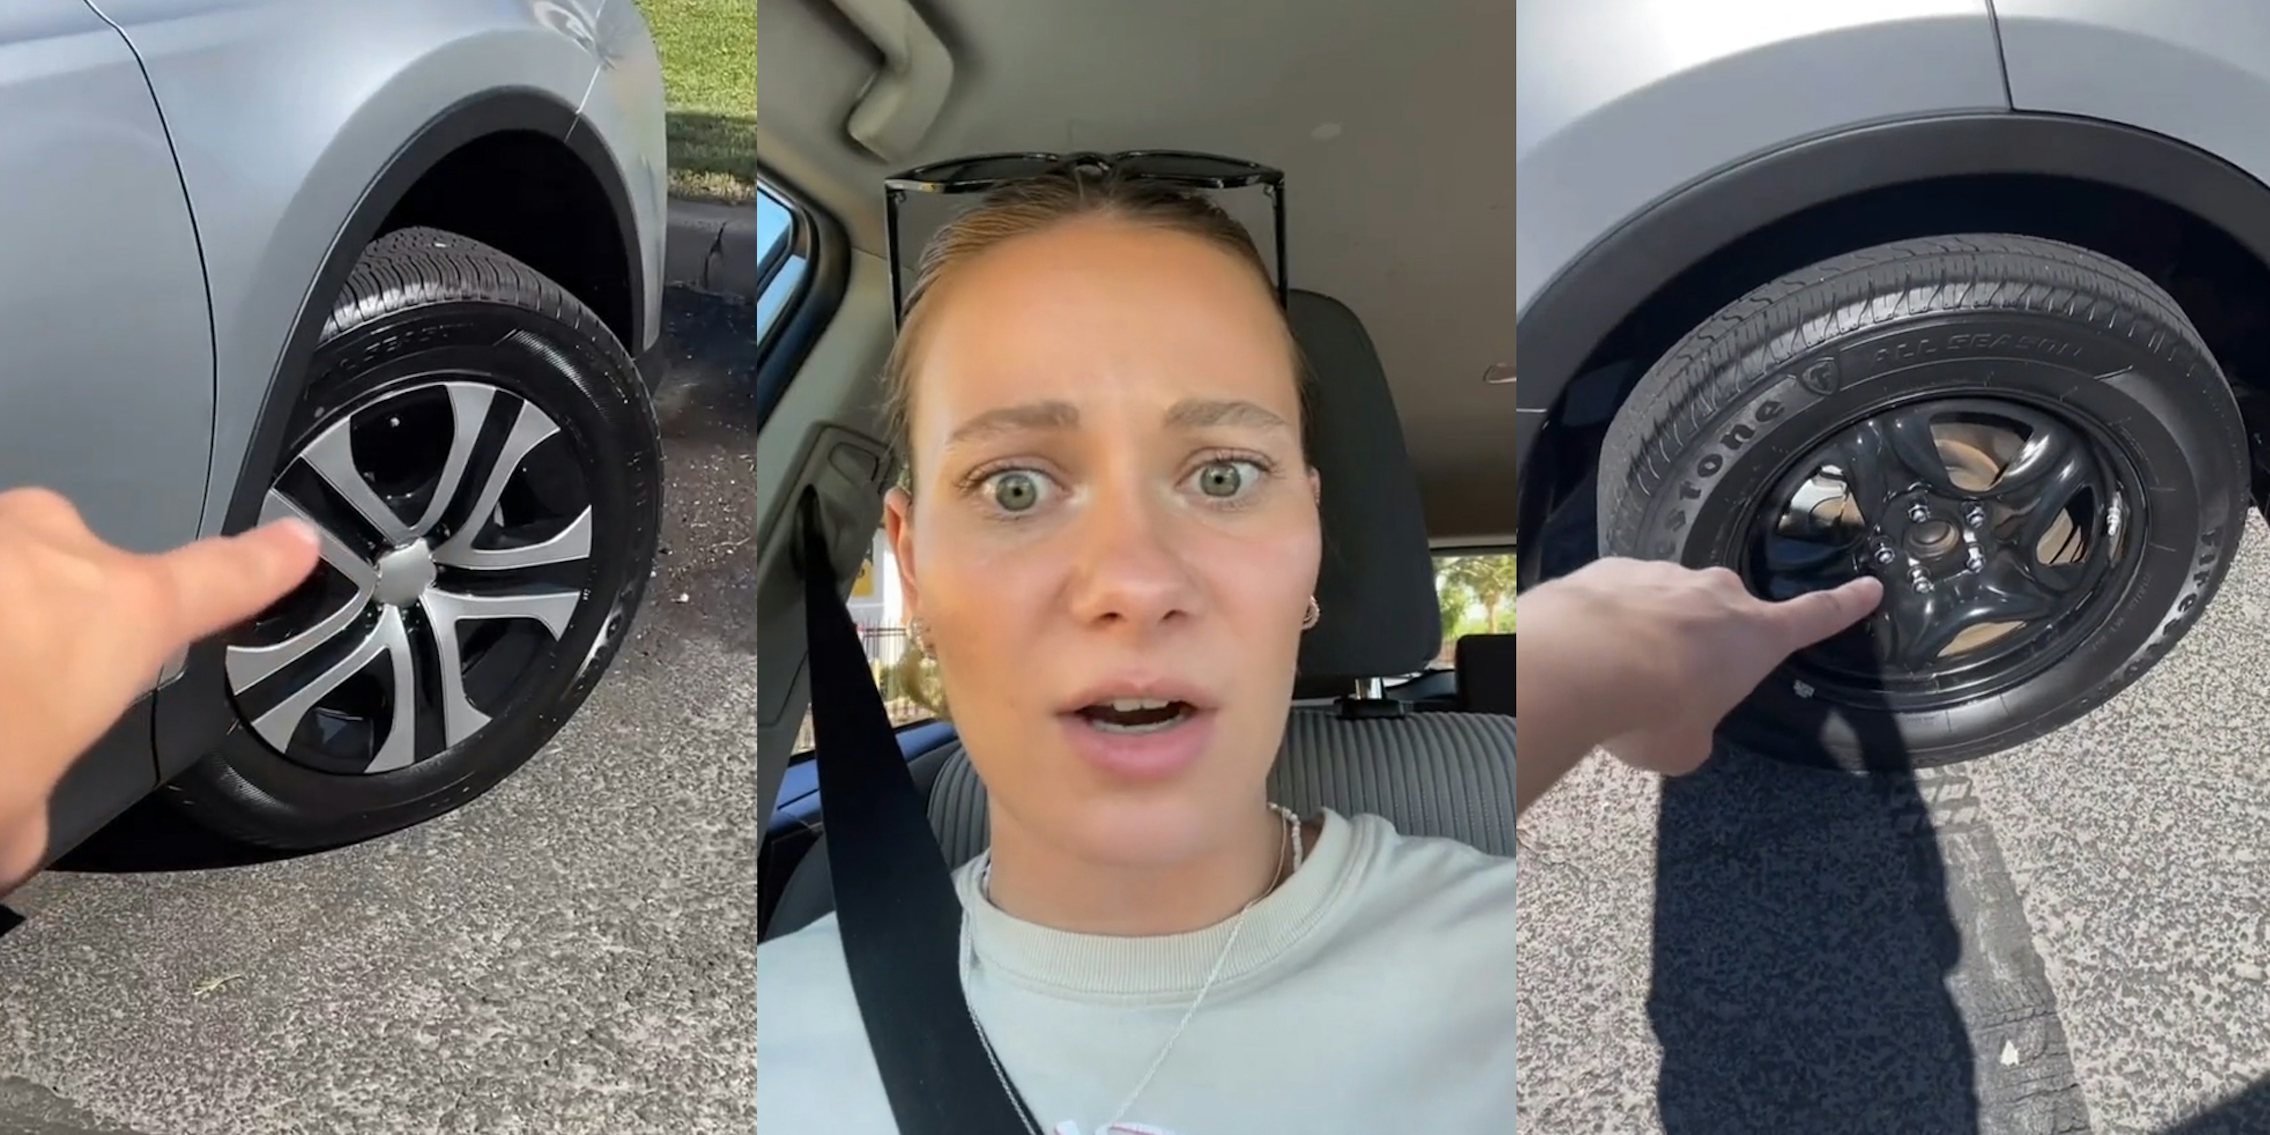 hand pointing to car tire with hub cap on (l) woman speaking in car (c) hand pointing to car tire missing hub cap (r)